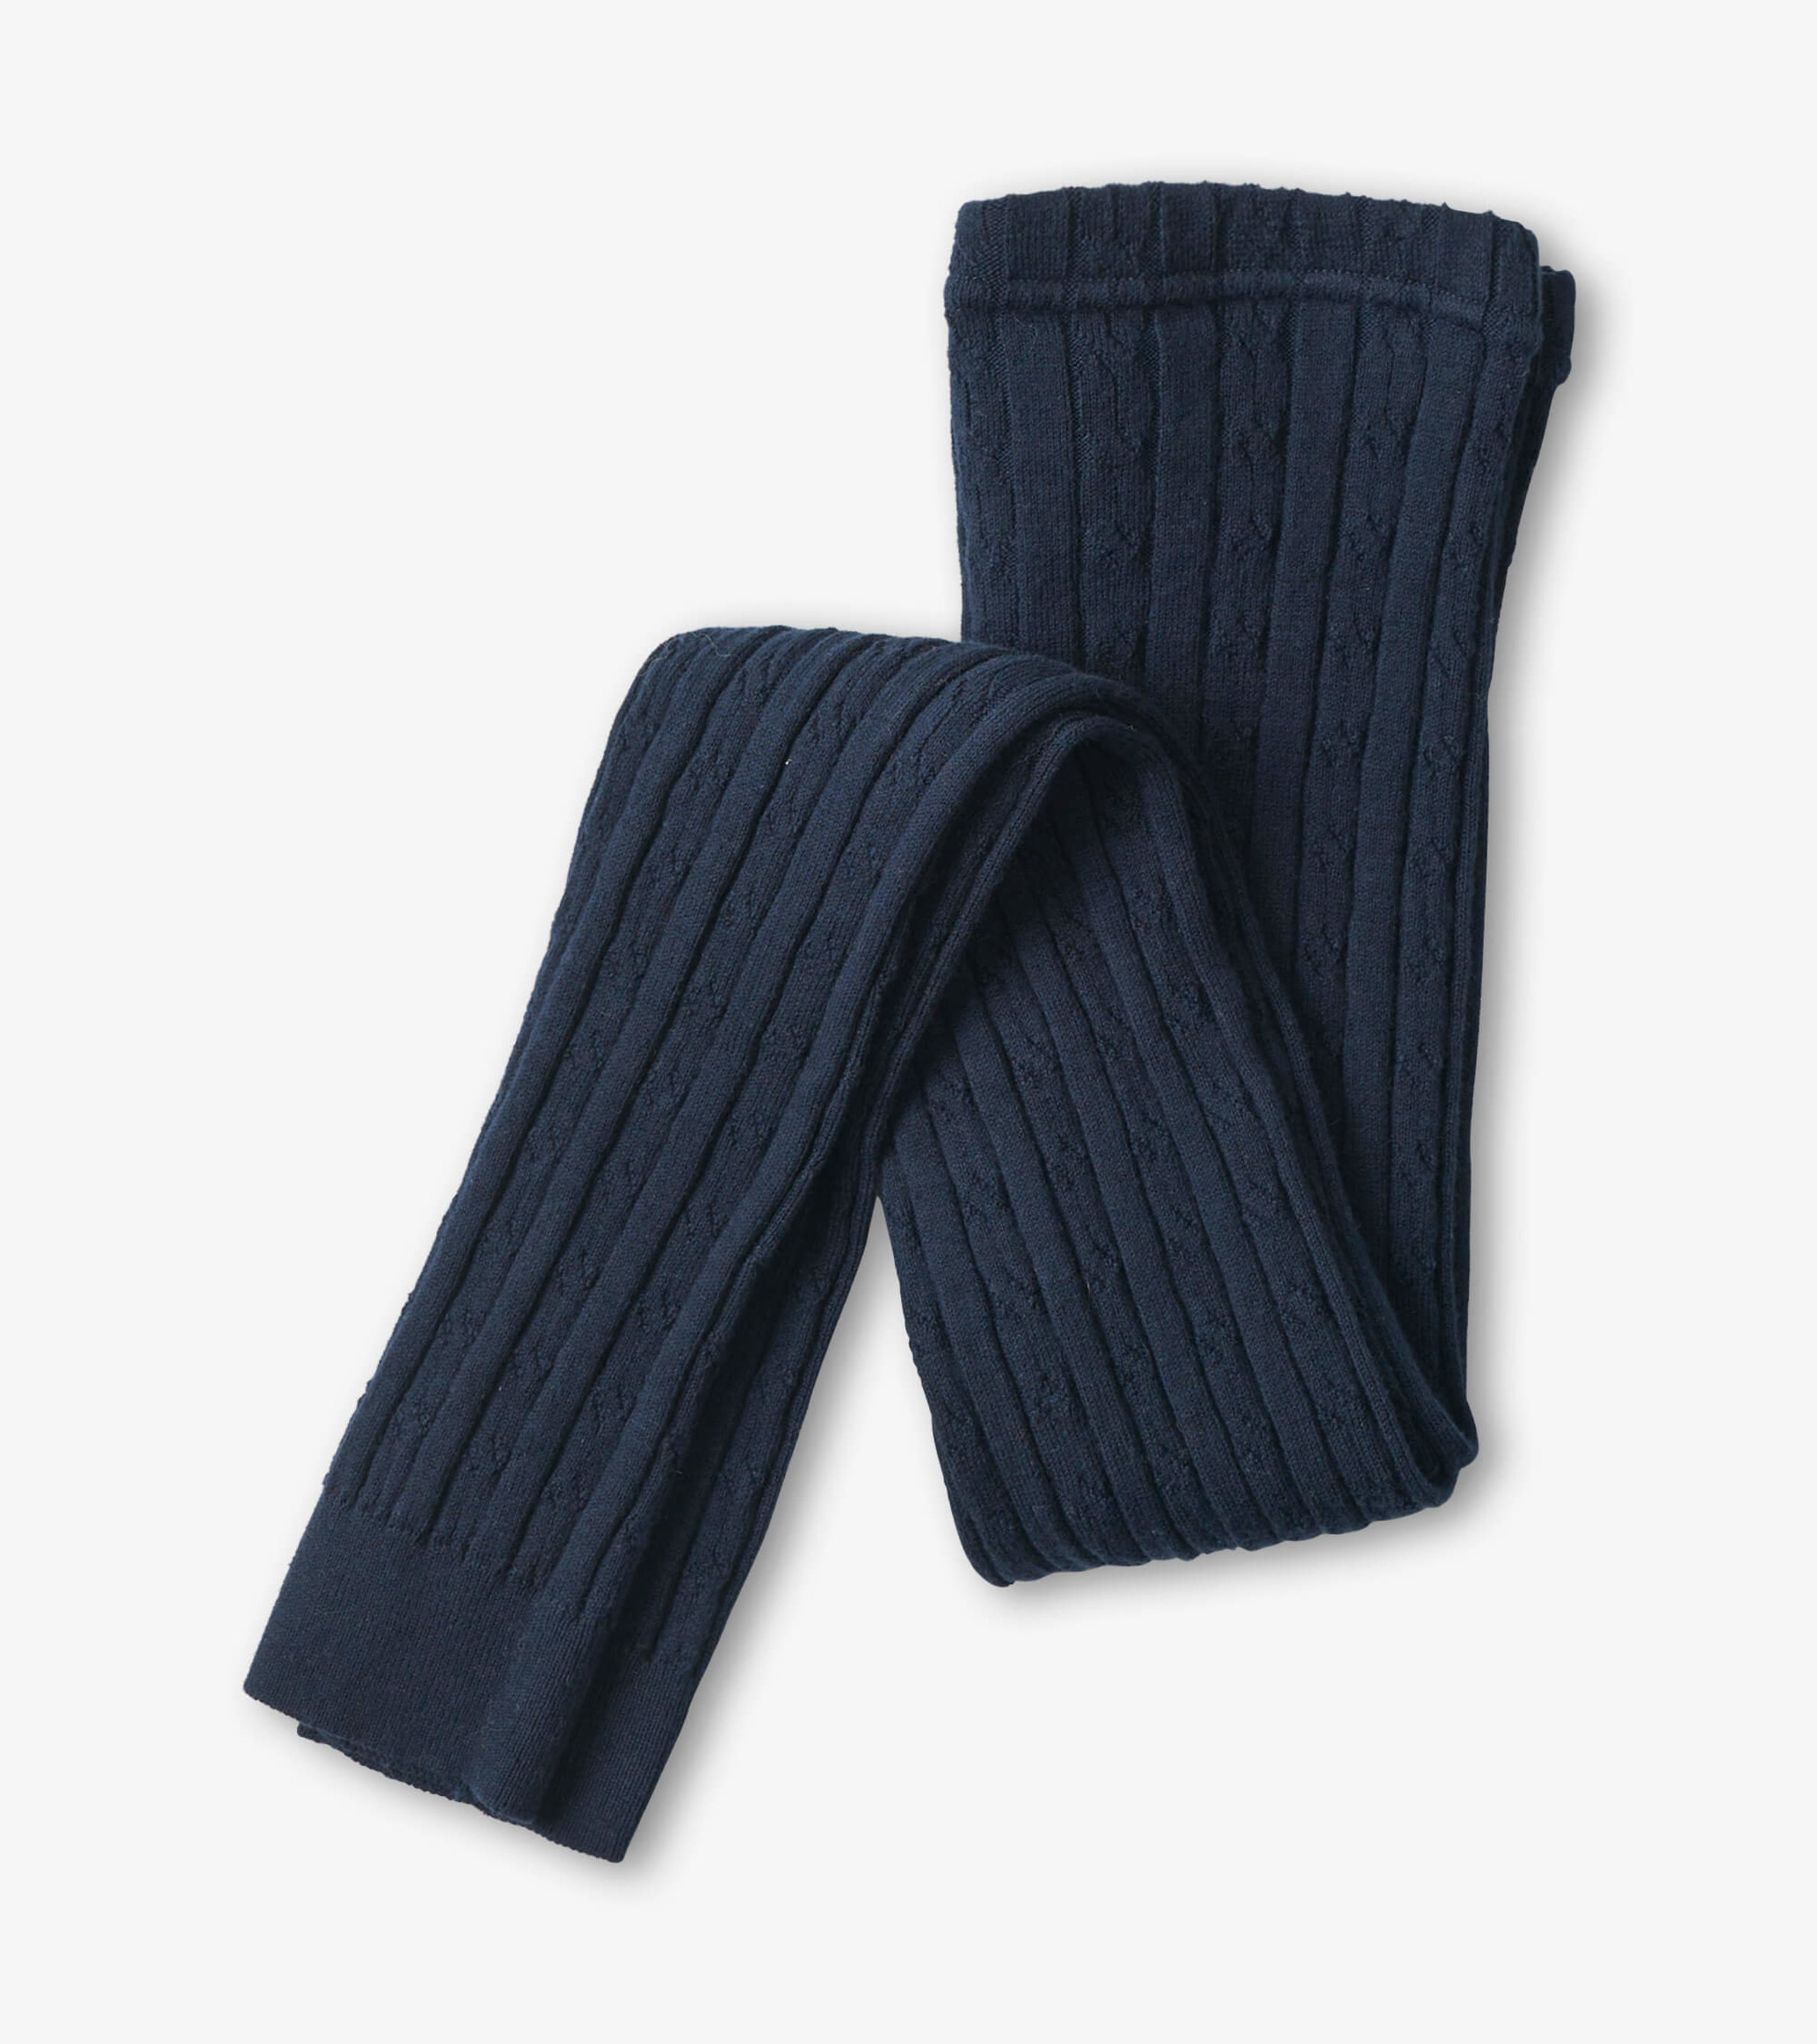 https://cdn.hatley.com/product_images/navy-cable-knit-tights/F00NBK744B_jpg/pdp_zoom.jpg?c=1695160362&locale=en